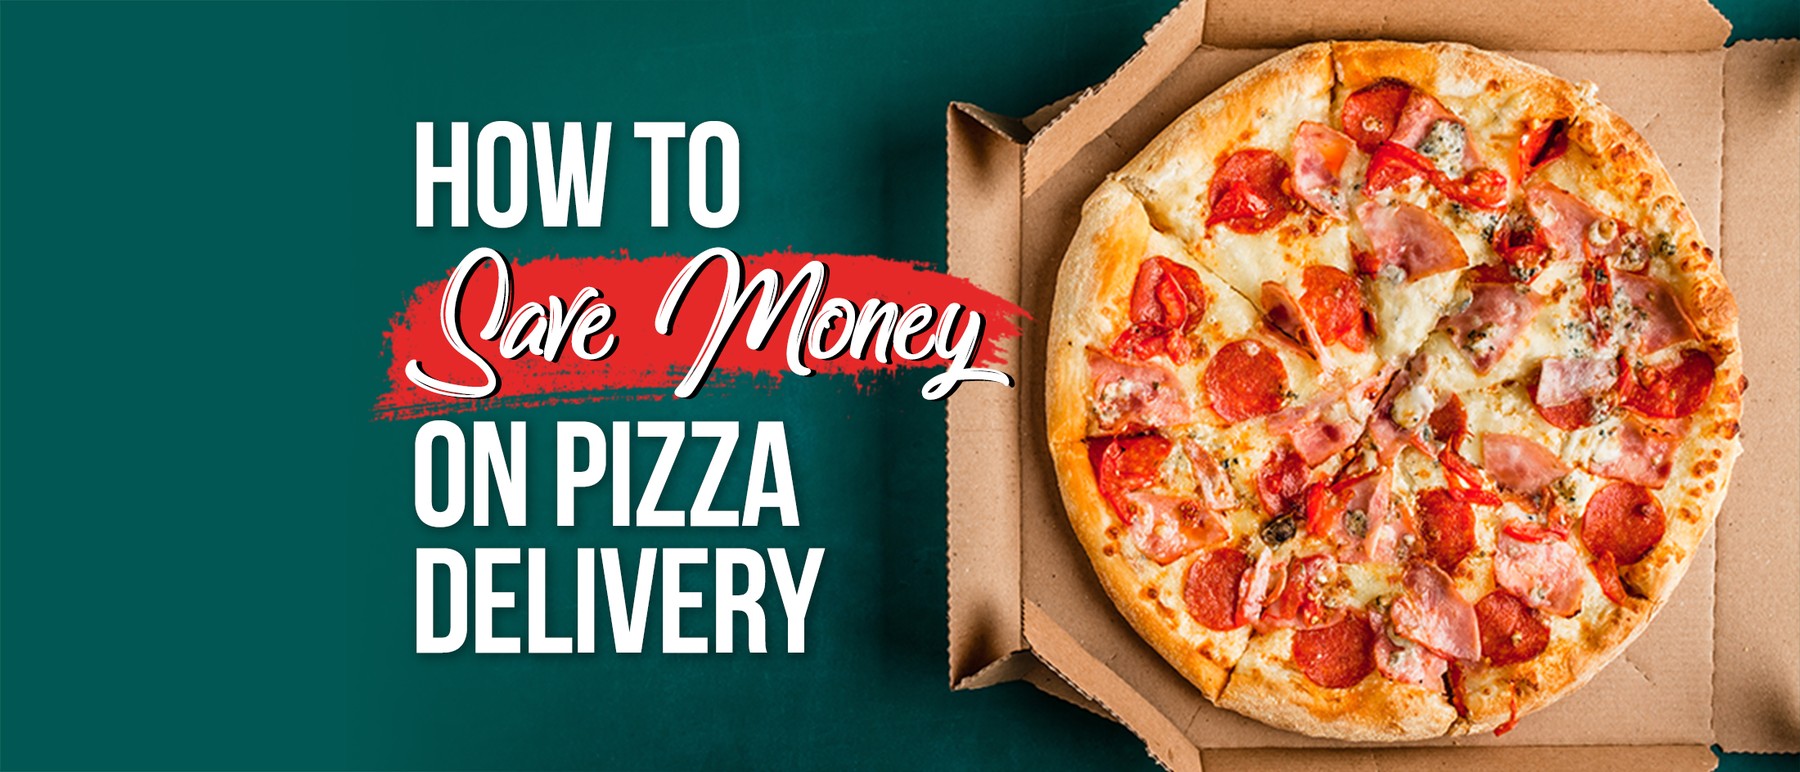 7 Ways to Save Money on Pizza Delivery